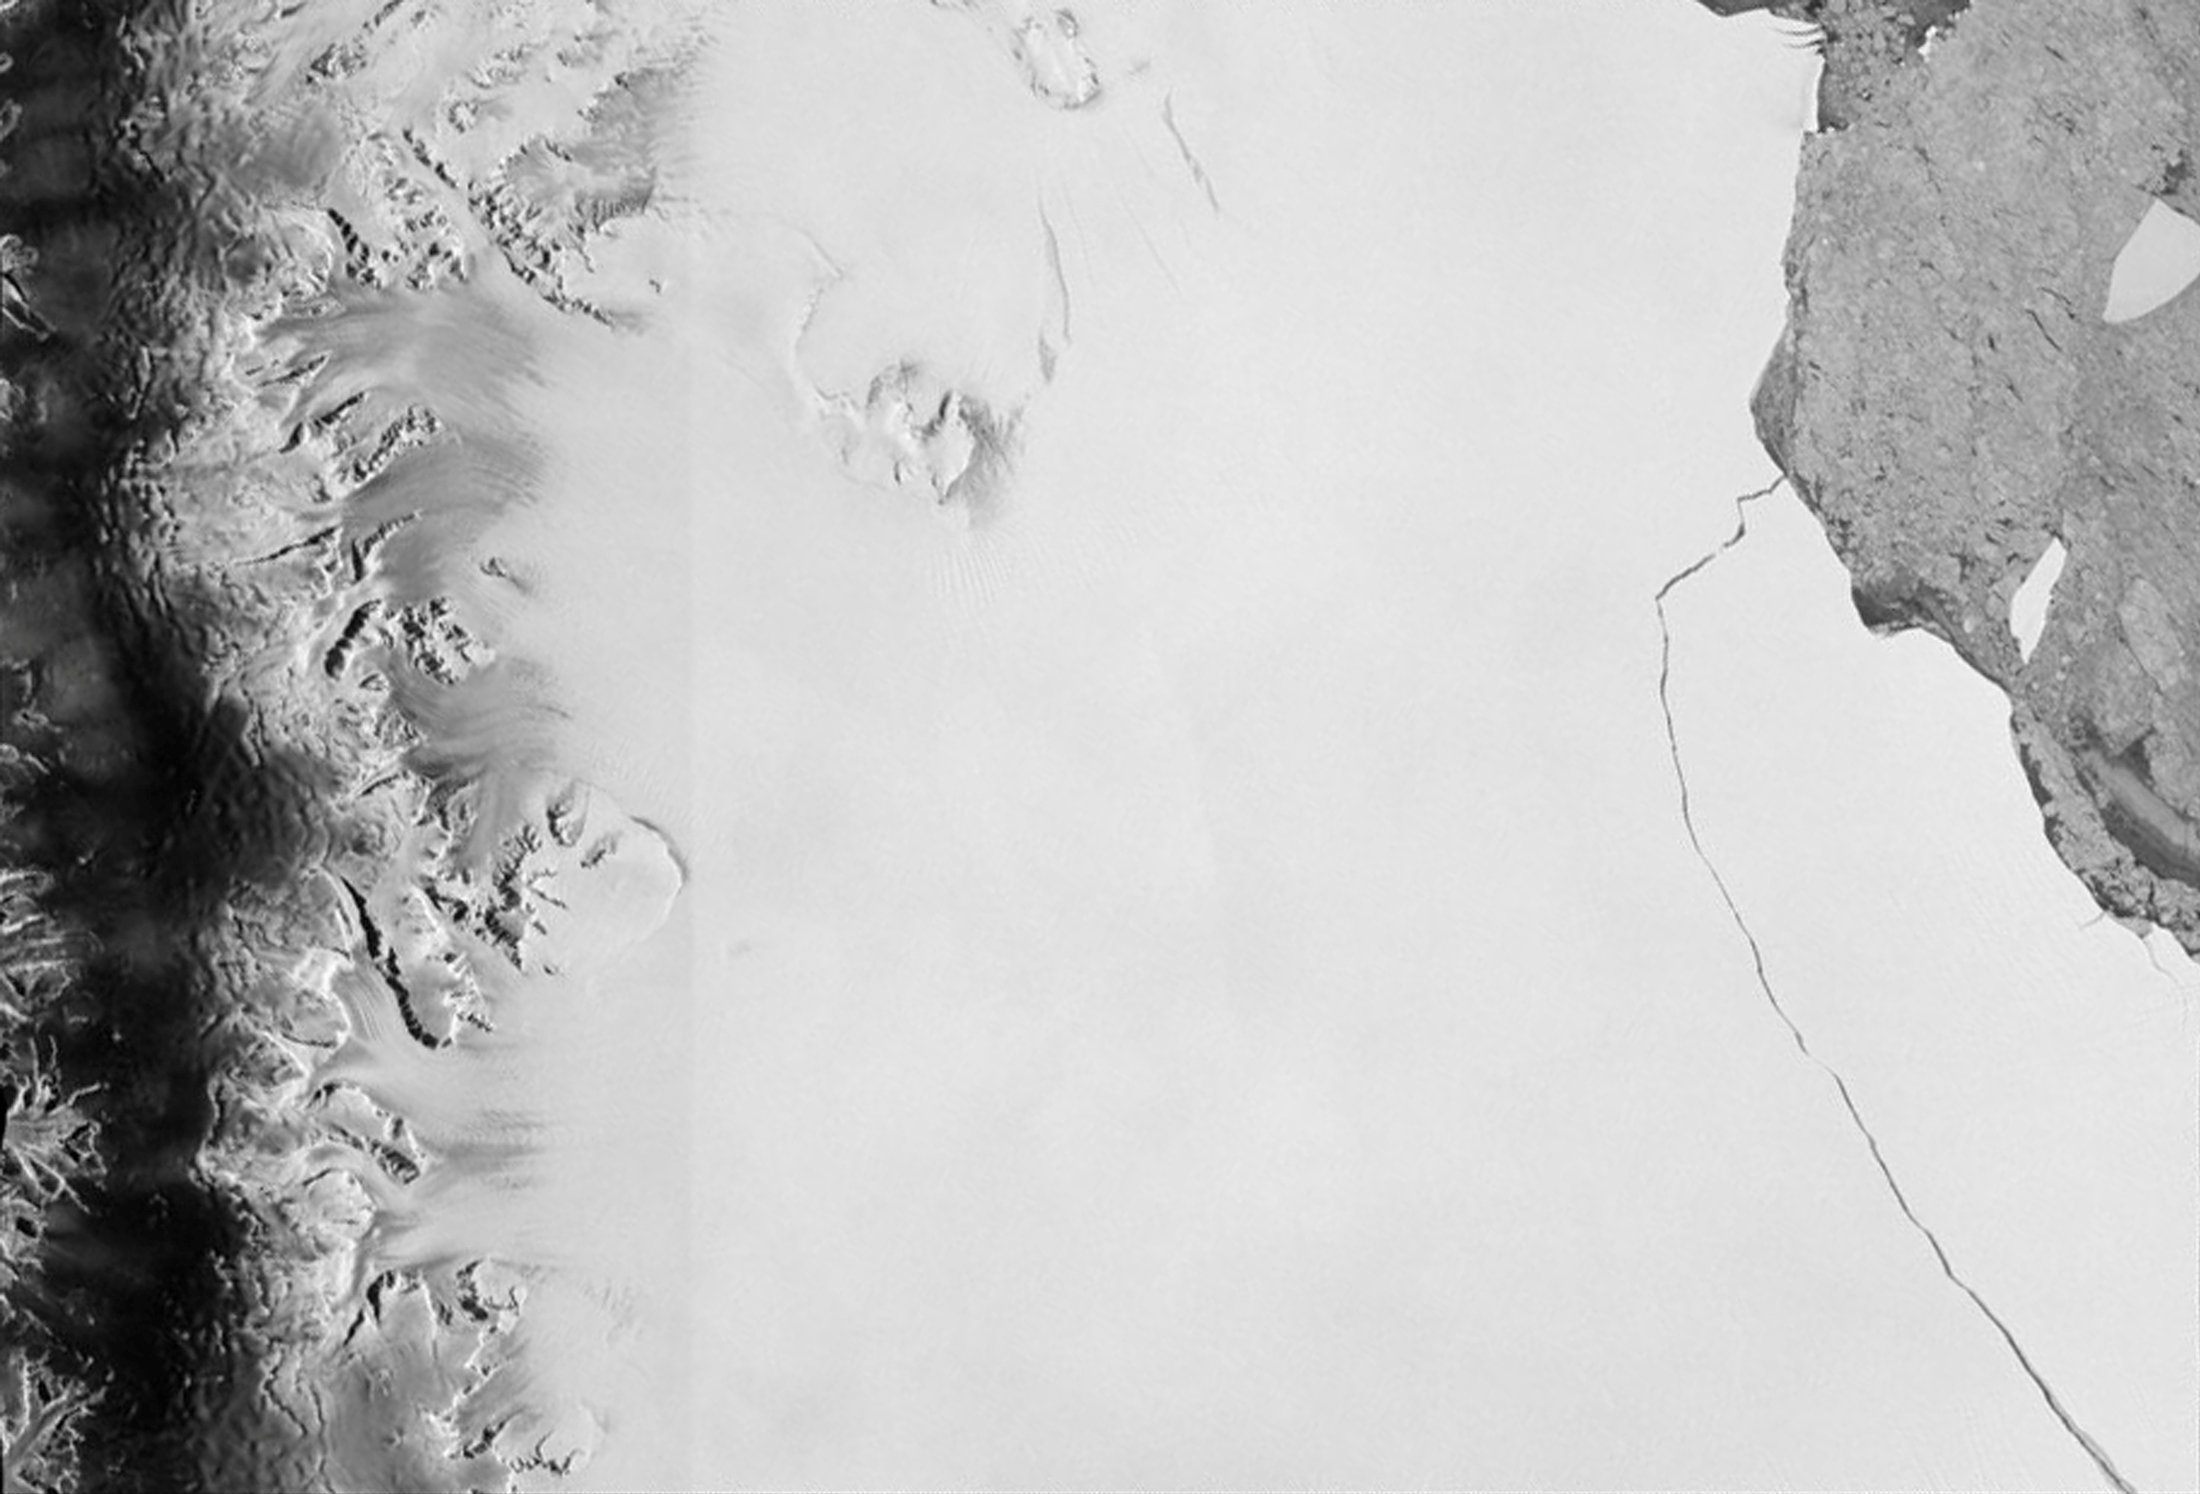 PHOTO: A section of an iceberg about 6,000 sq km broke away as part of the natural cycle of iceberg calving off the Larsen-C ice shelf in Antarctica in this satellite image released by the European Space Agency, July 12, 2017.